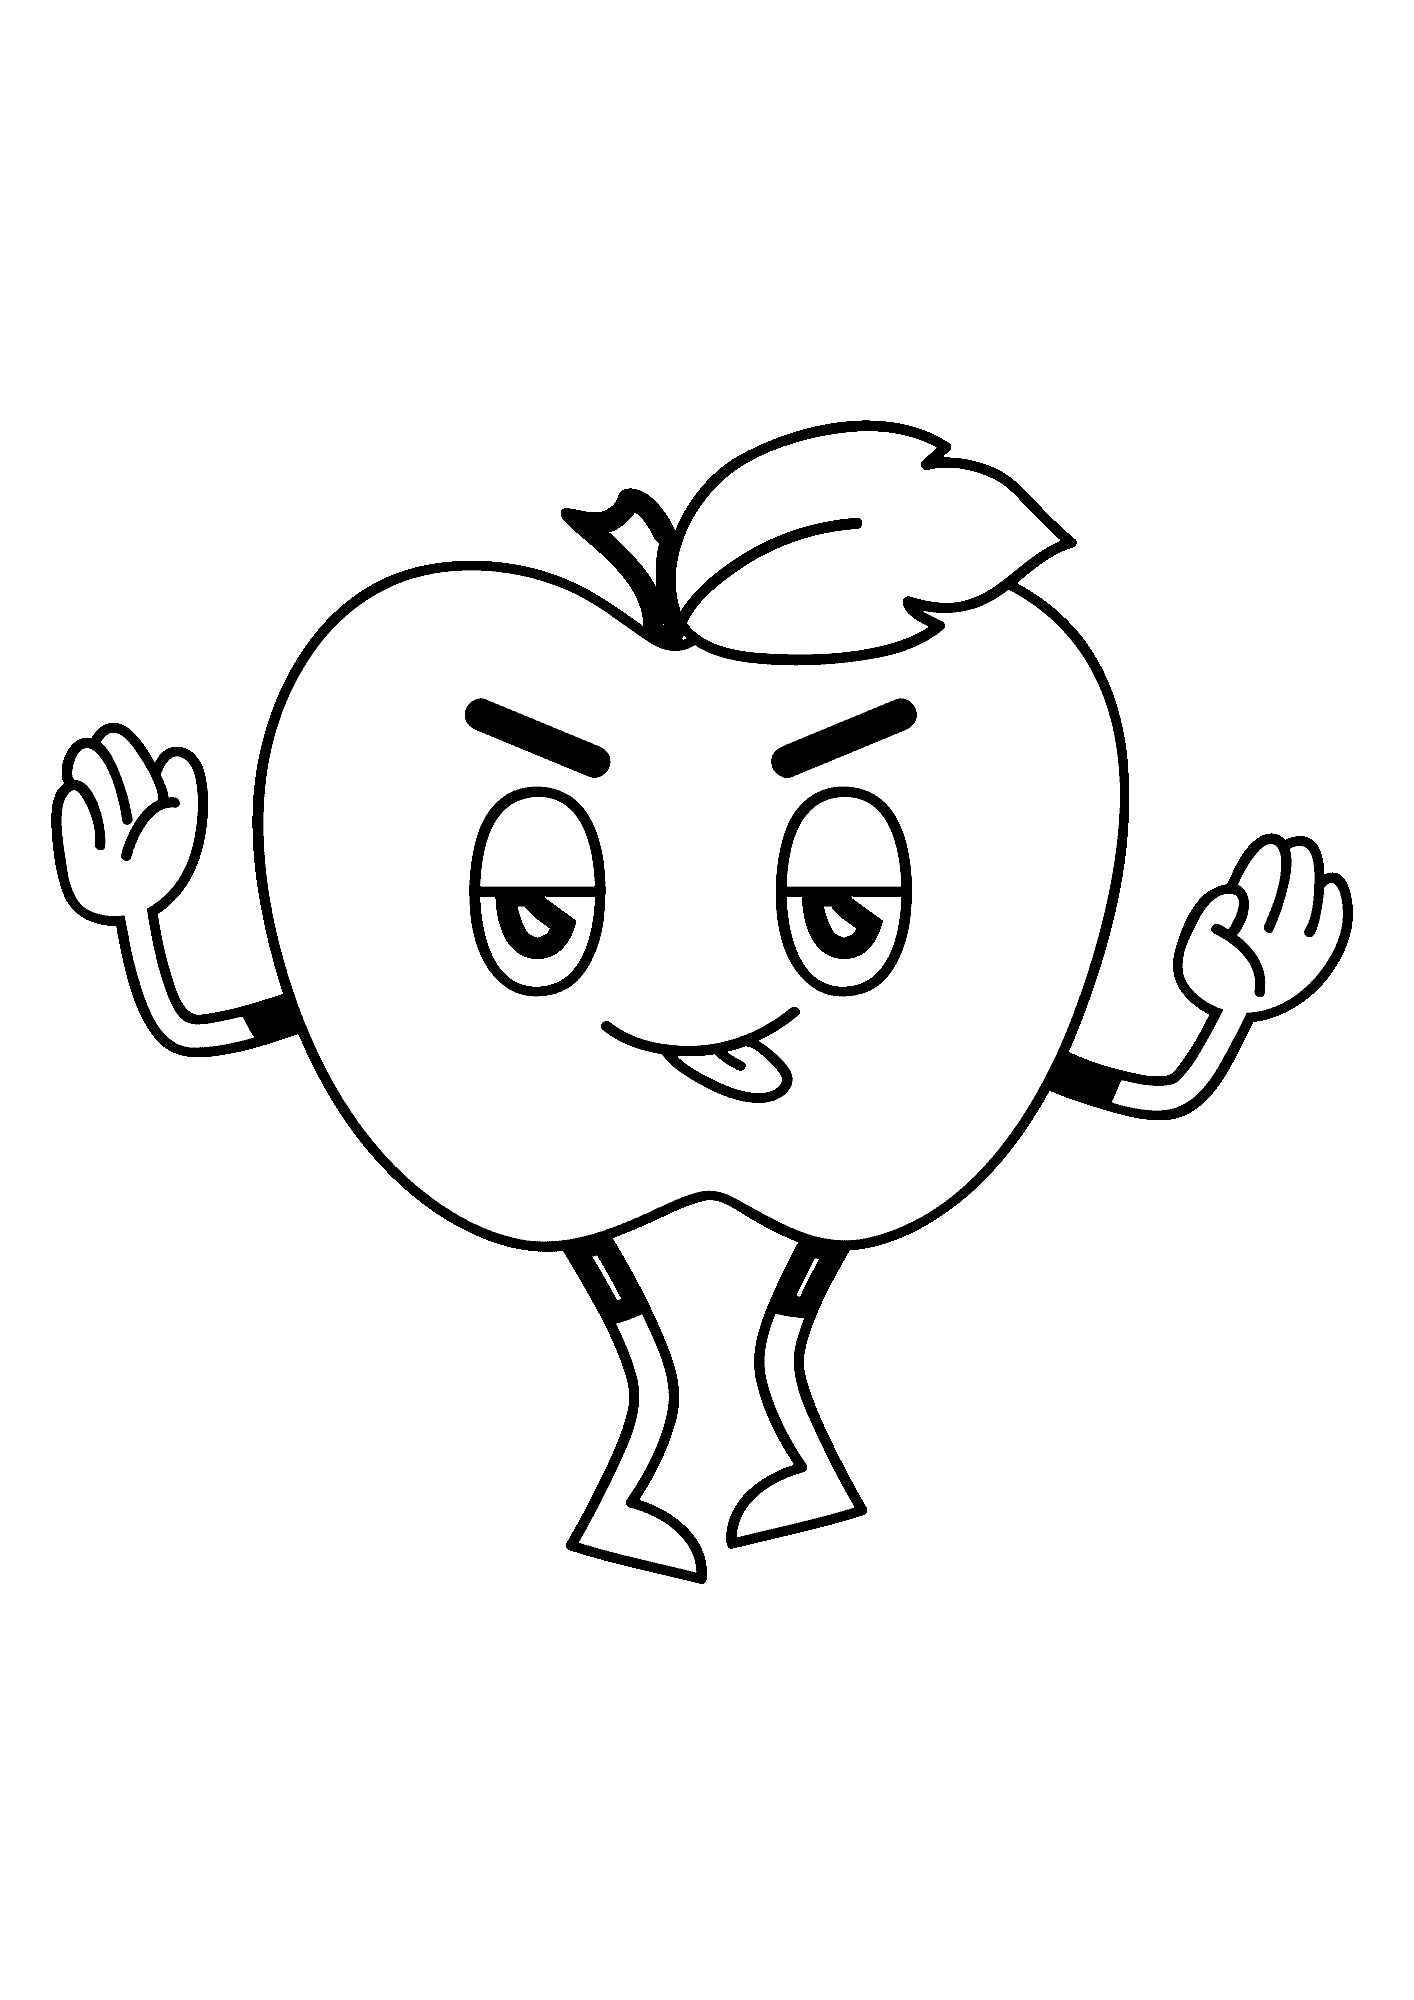 Retro Apple With Face Coloring Pages